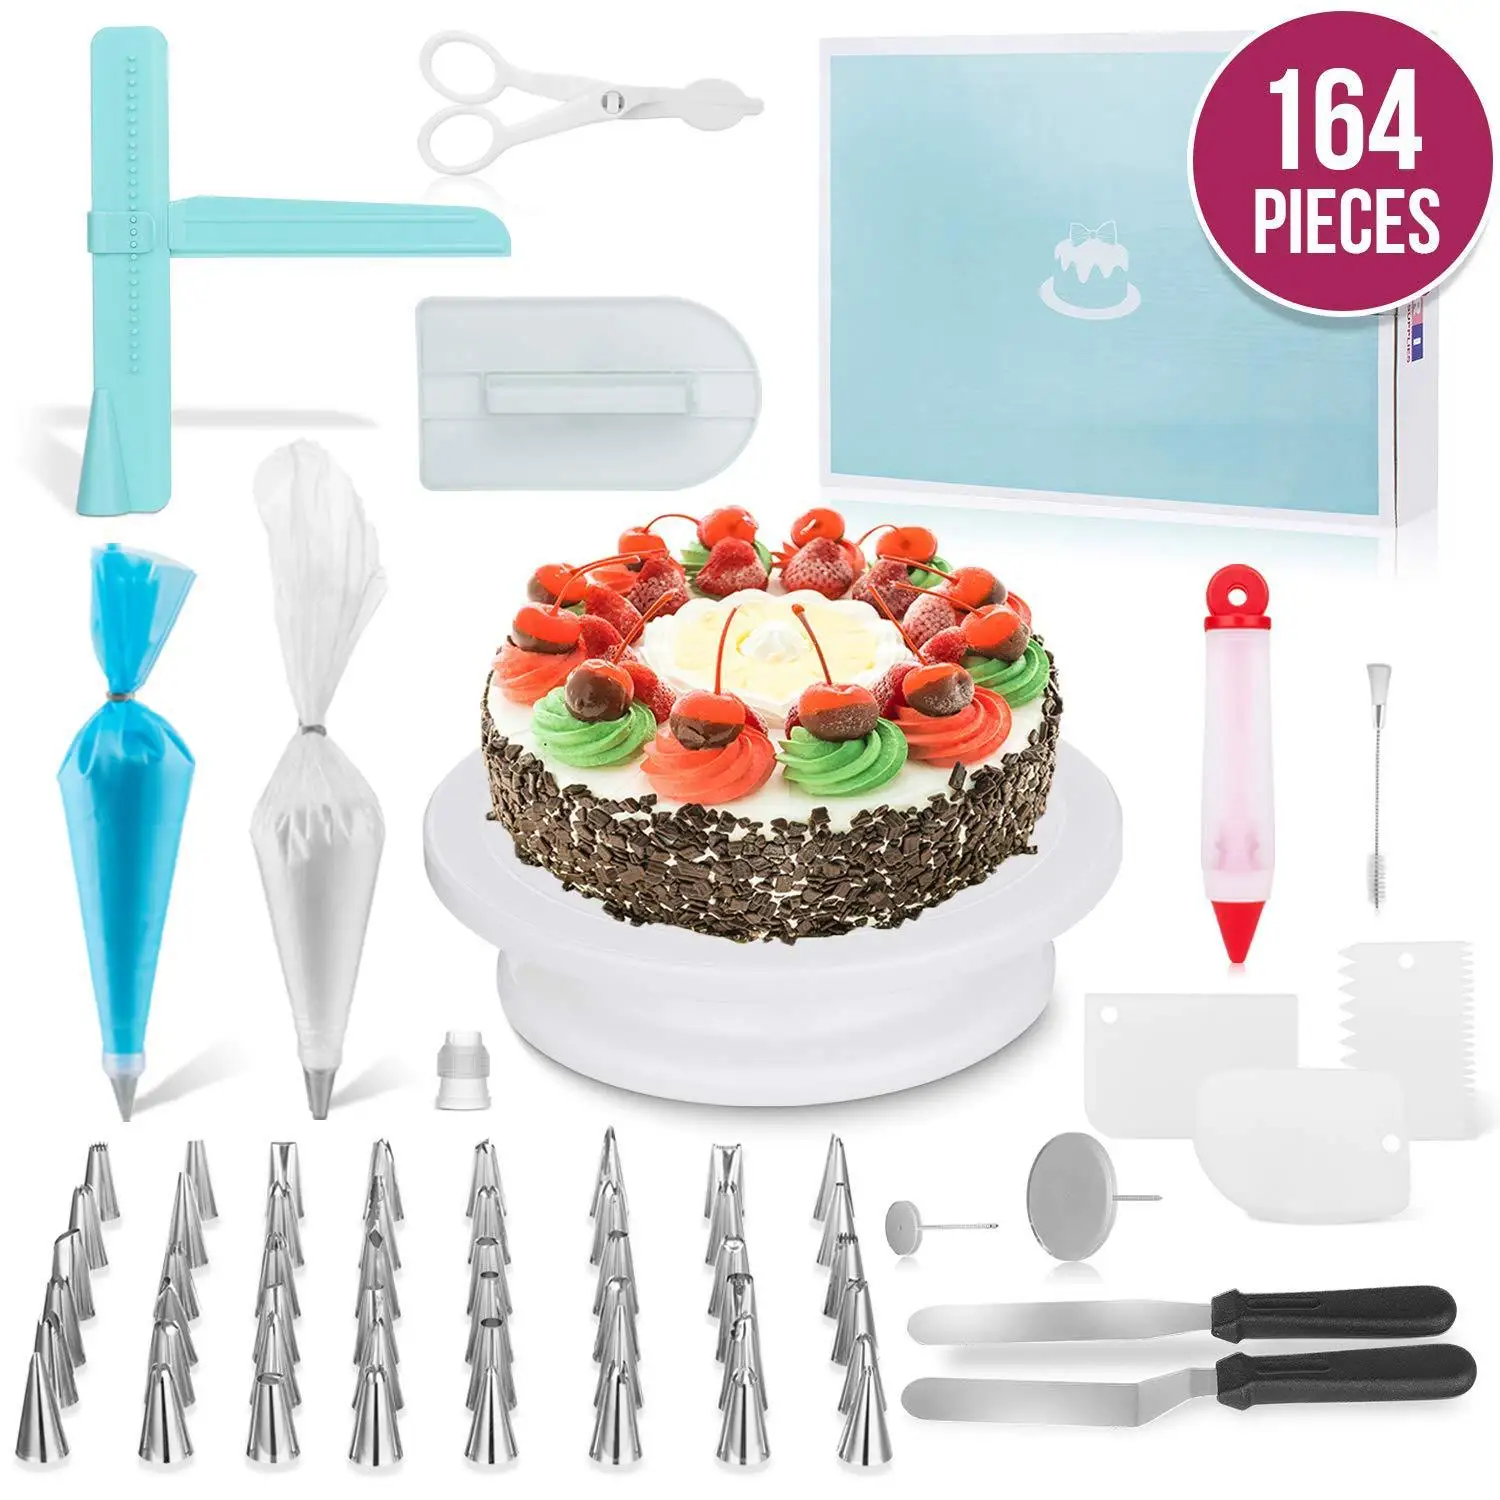 

164pcs Baking Pastry Tools Set Cake Decorating Supplies Kit for Beginners with Baking Tools home party Bakeware